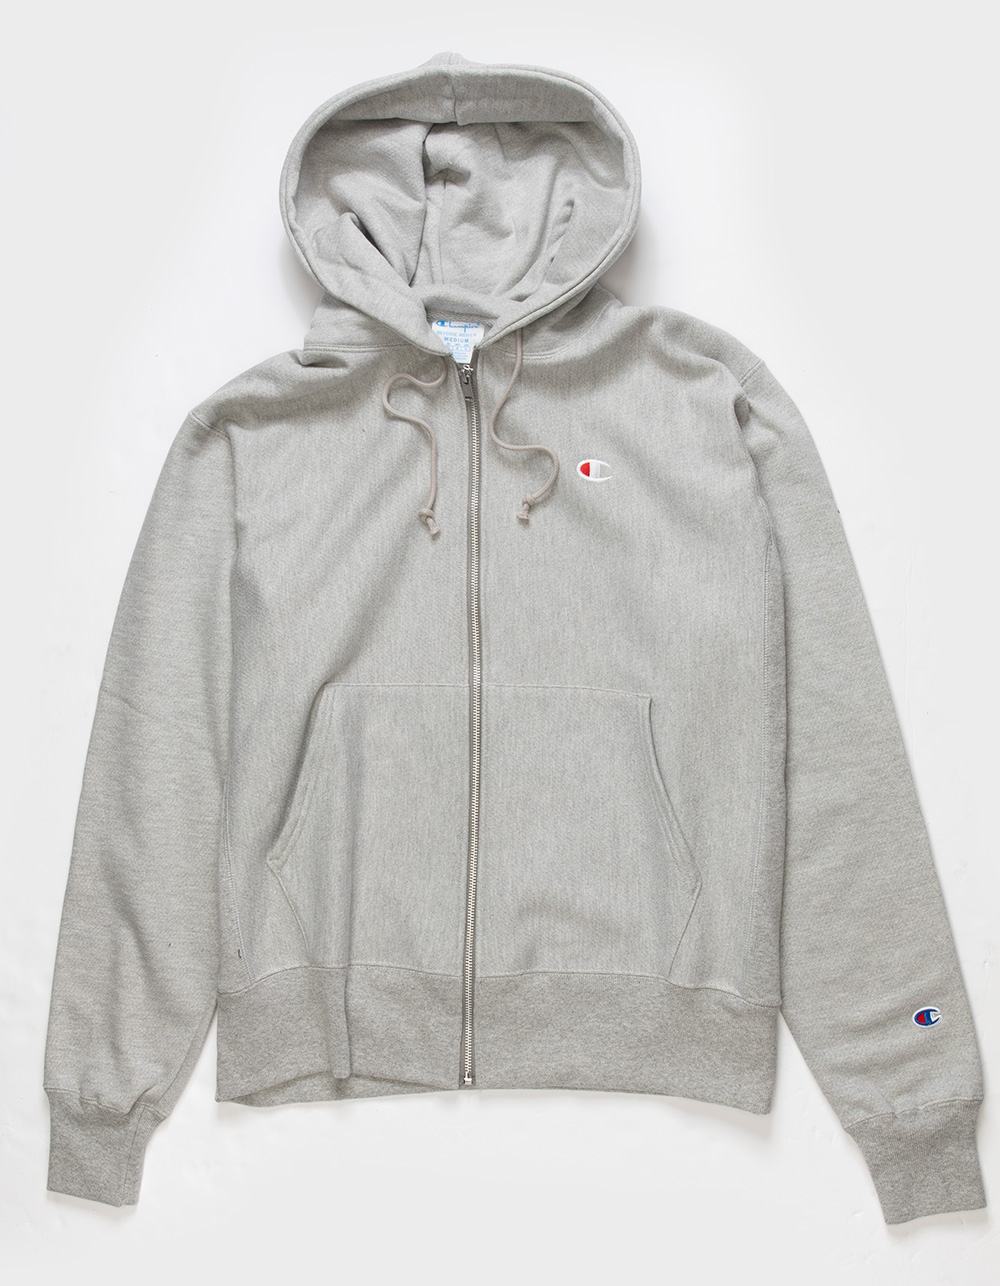 Champion Men's Life Reverse Weave Pullover Hoodie, Oxford Gray, S